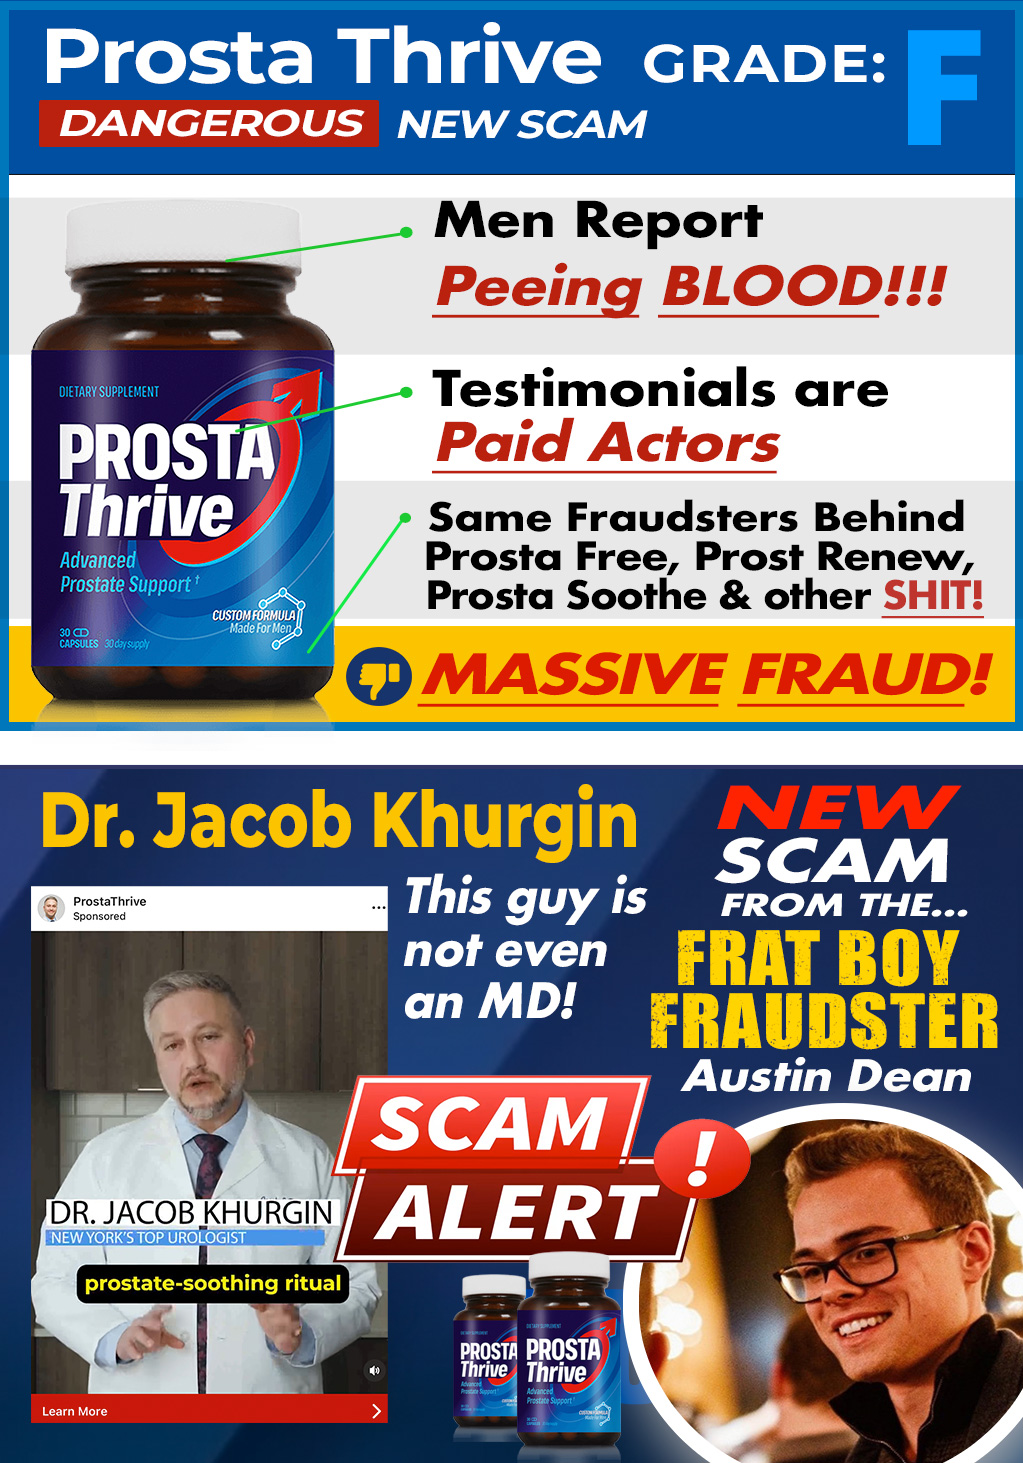 Prosta Thrive - product rating and information card